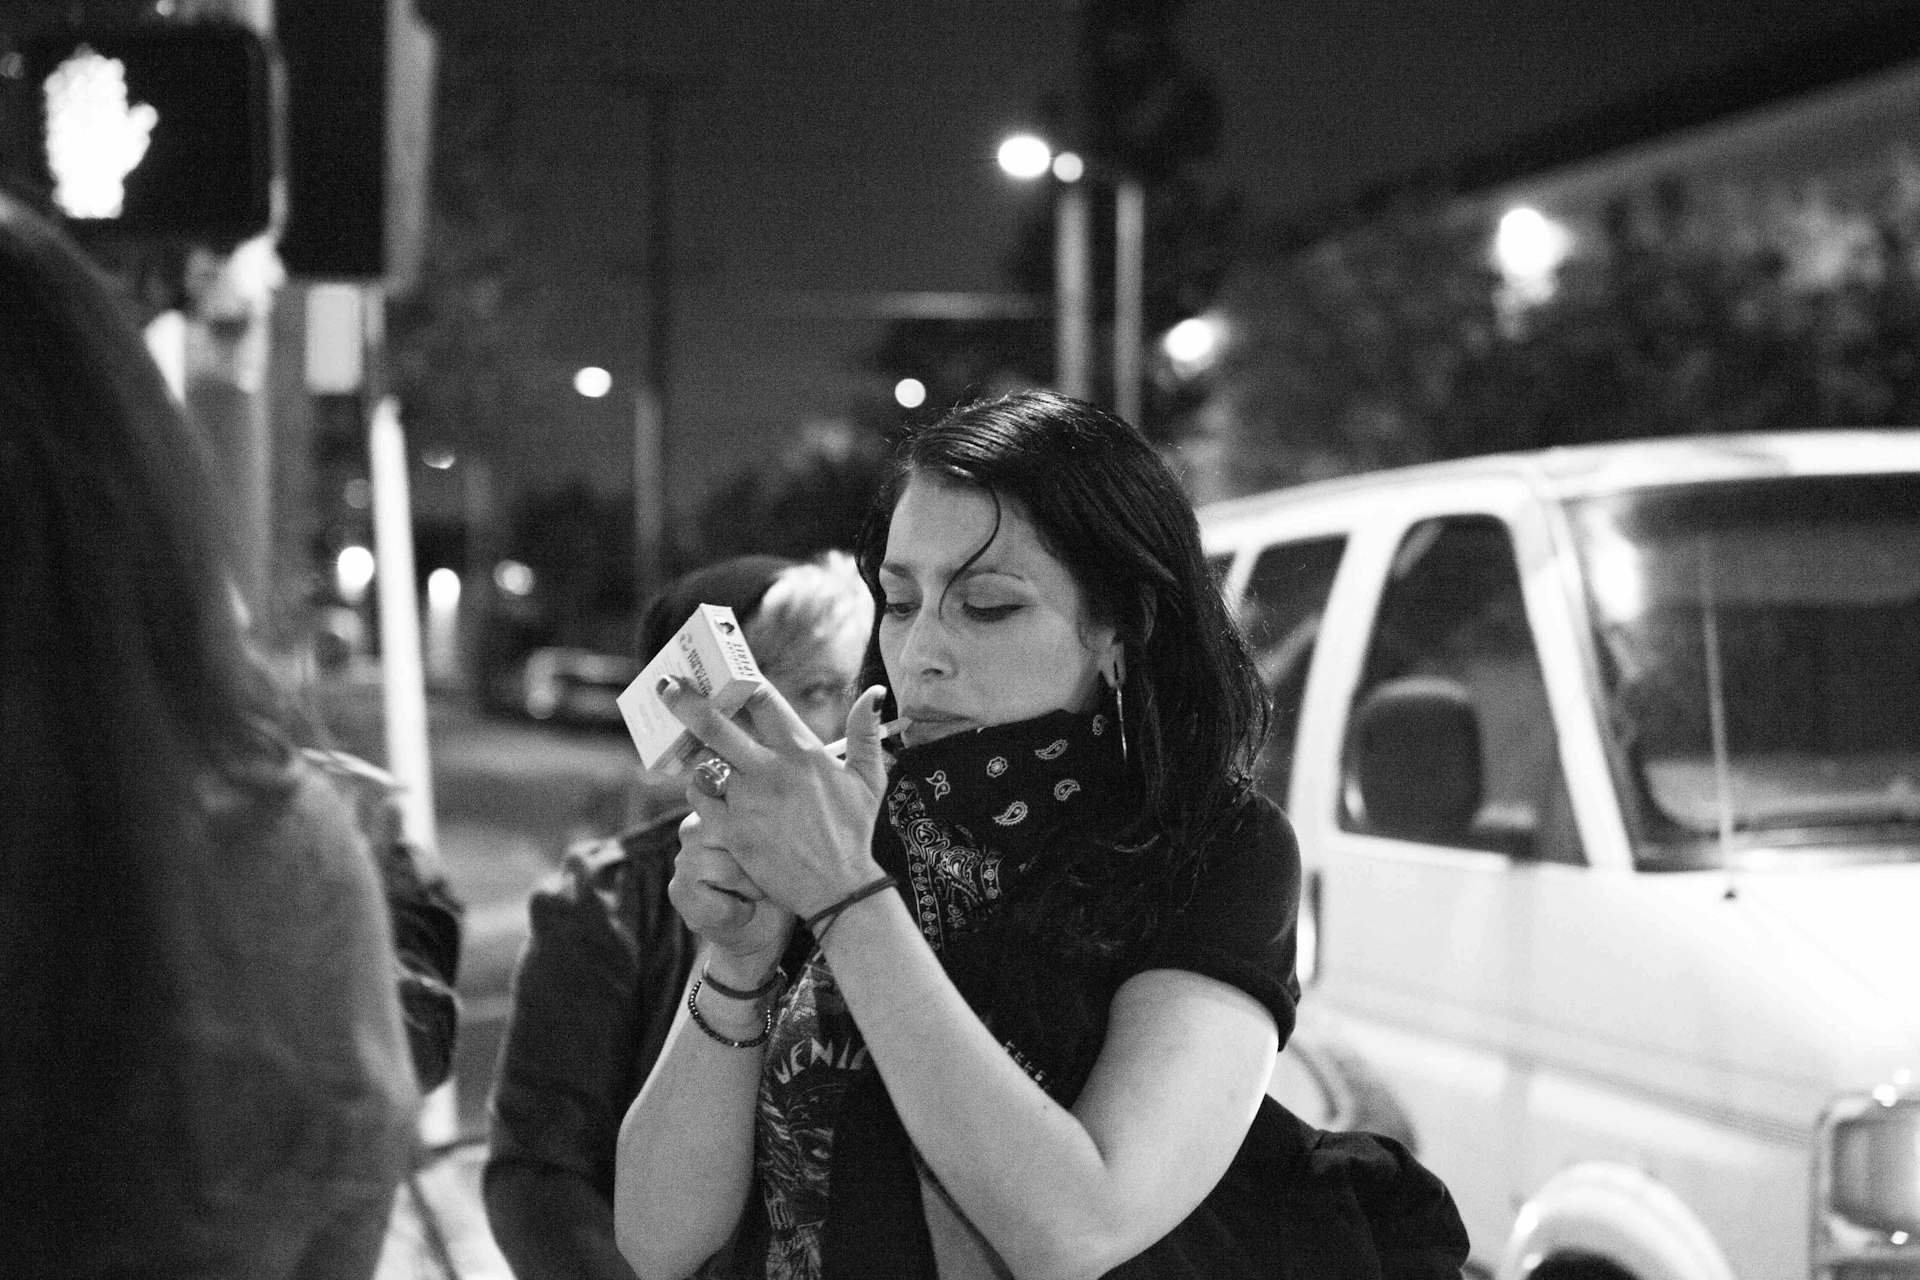 Xela De La X, founder of the collective, sparks up at a recent meet in Downtown LA